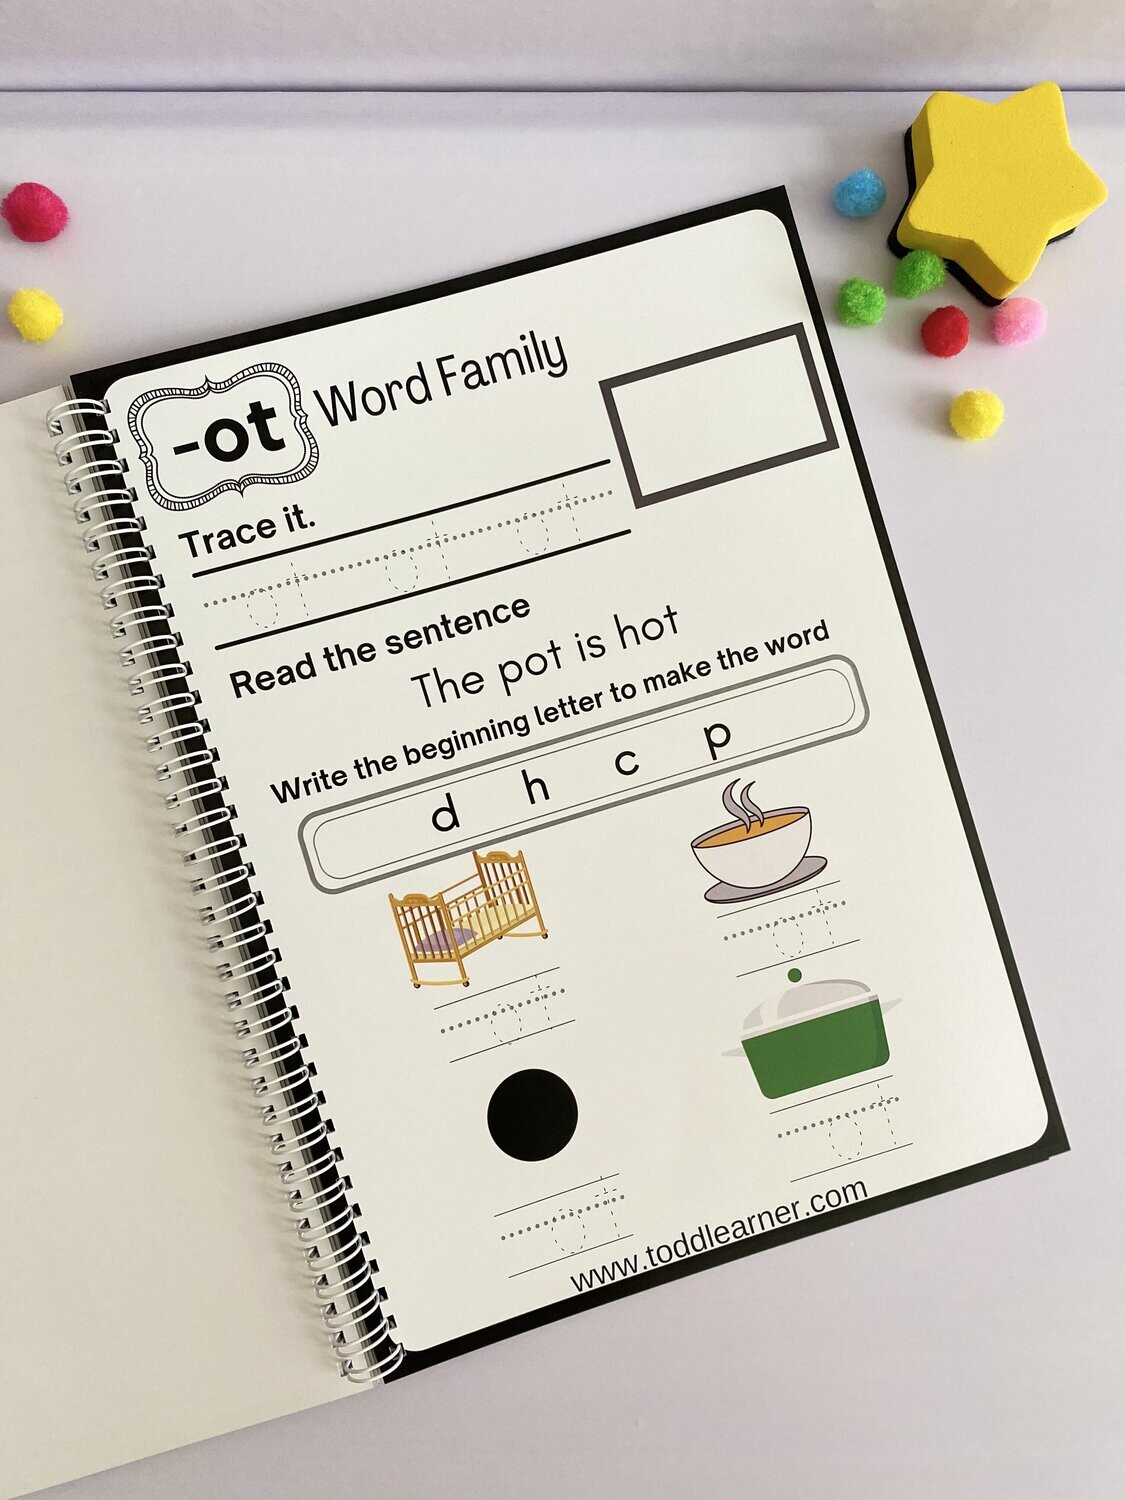 Rewritable Word Families Learning Book for Kids.